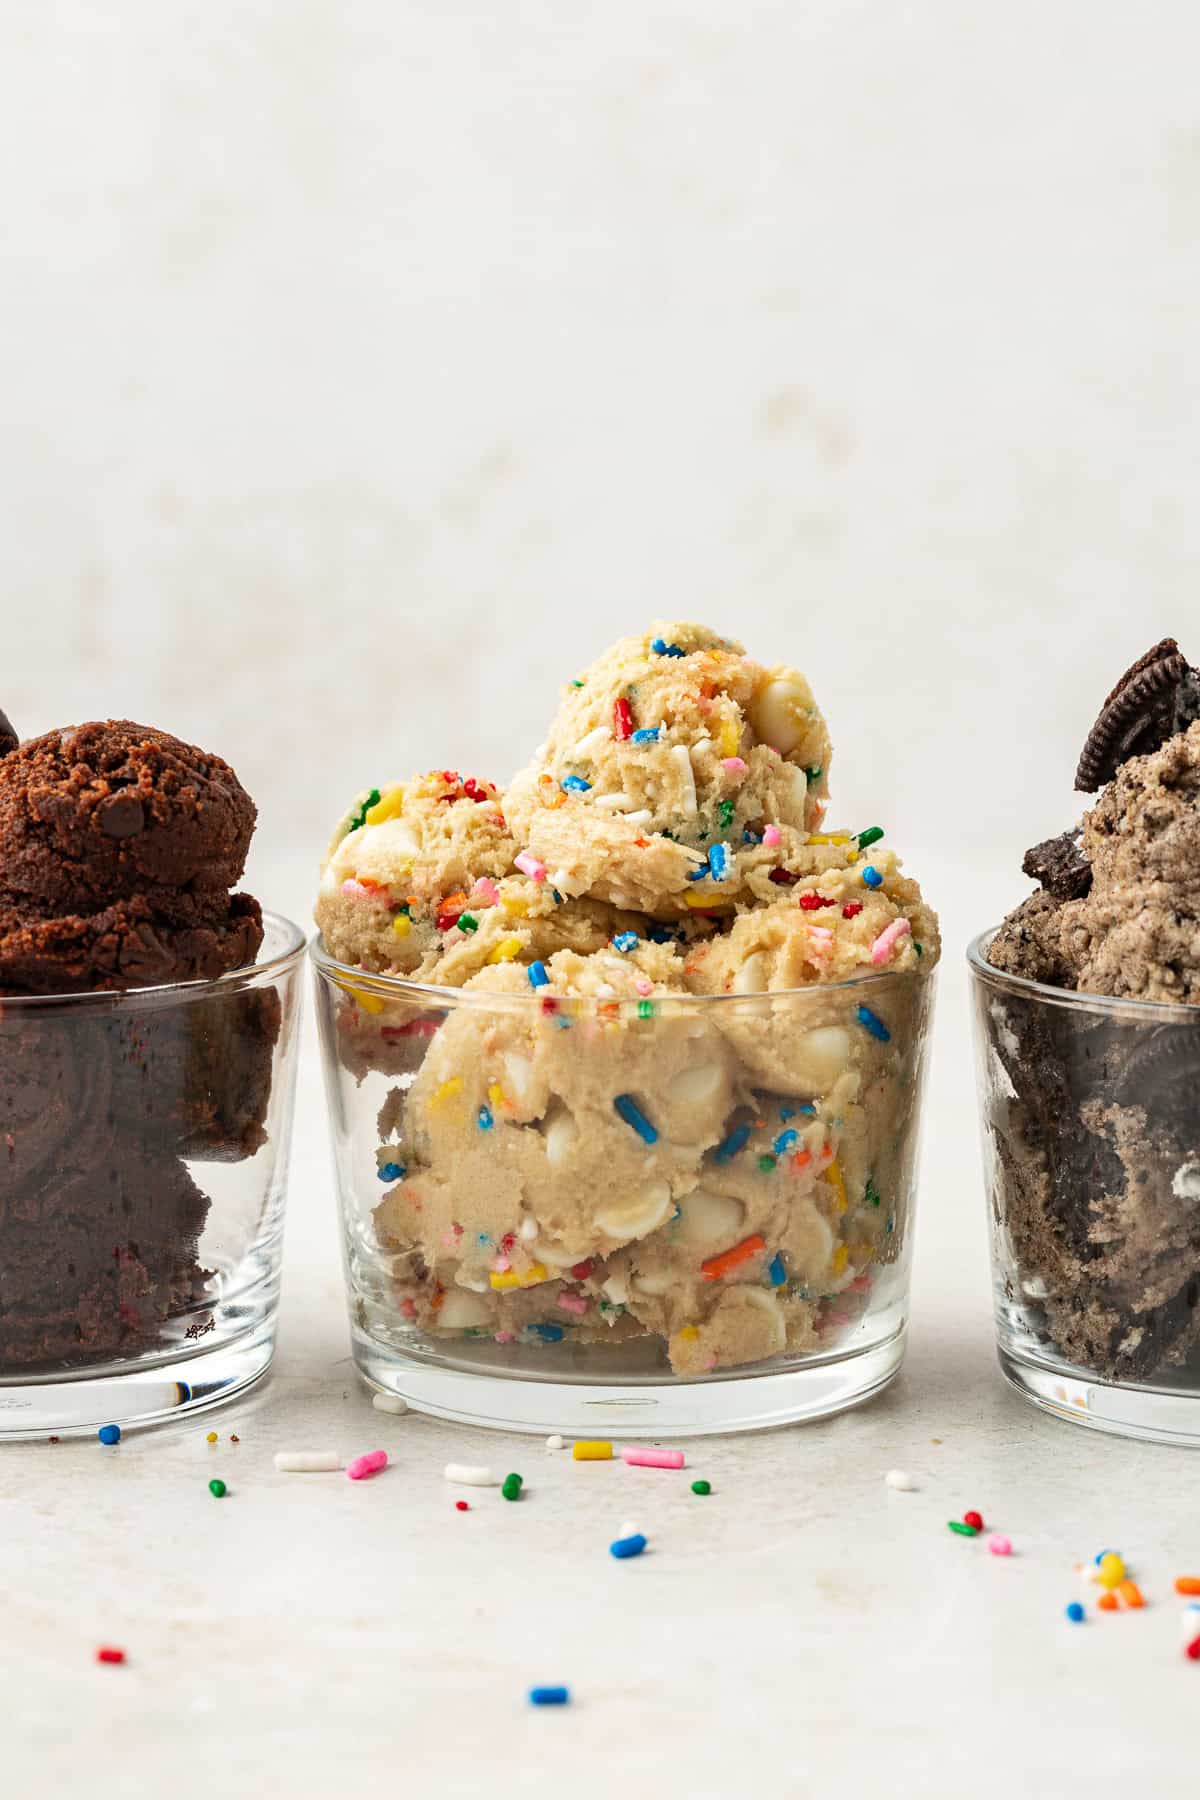 three round glass containers full of edible cookie dough with chocolate on the left, funfetti in the middle and oreo flavor on the right, with rainbow sprinkles scattered around